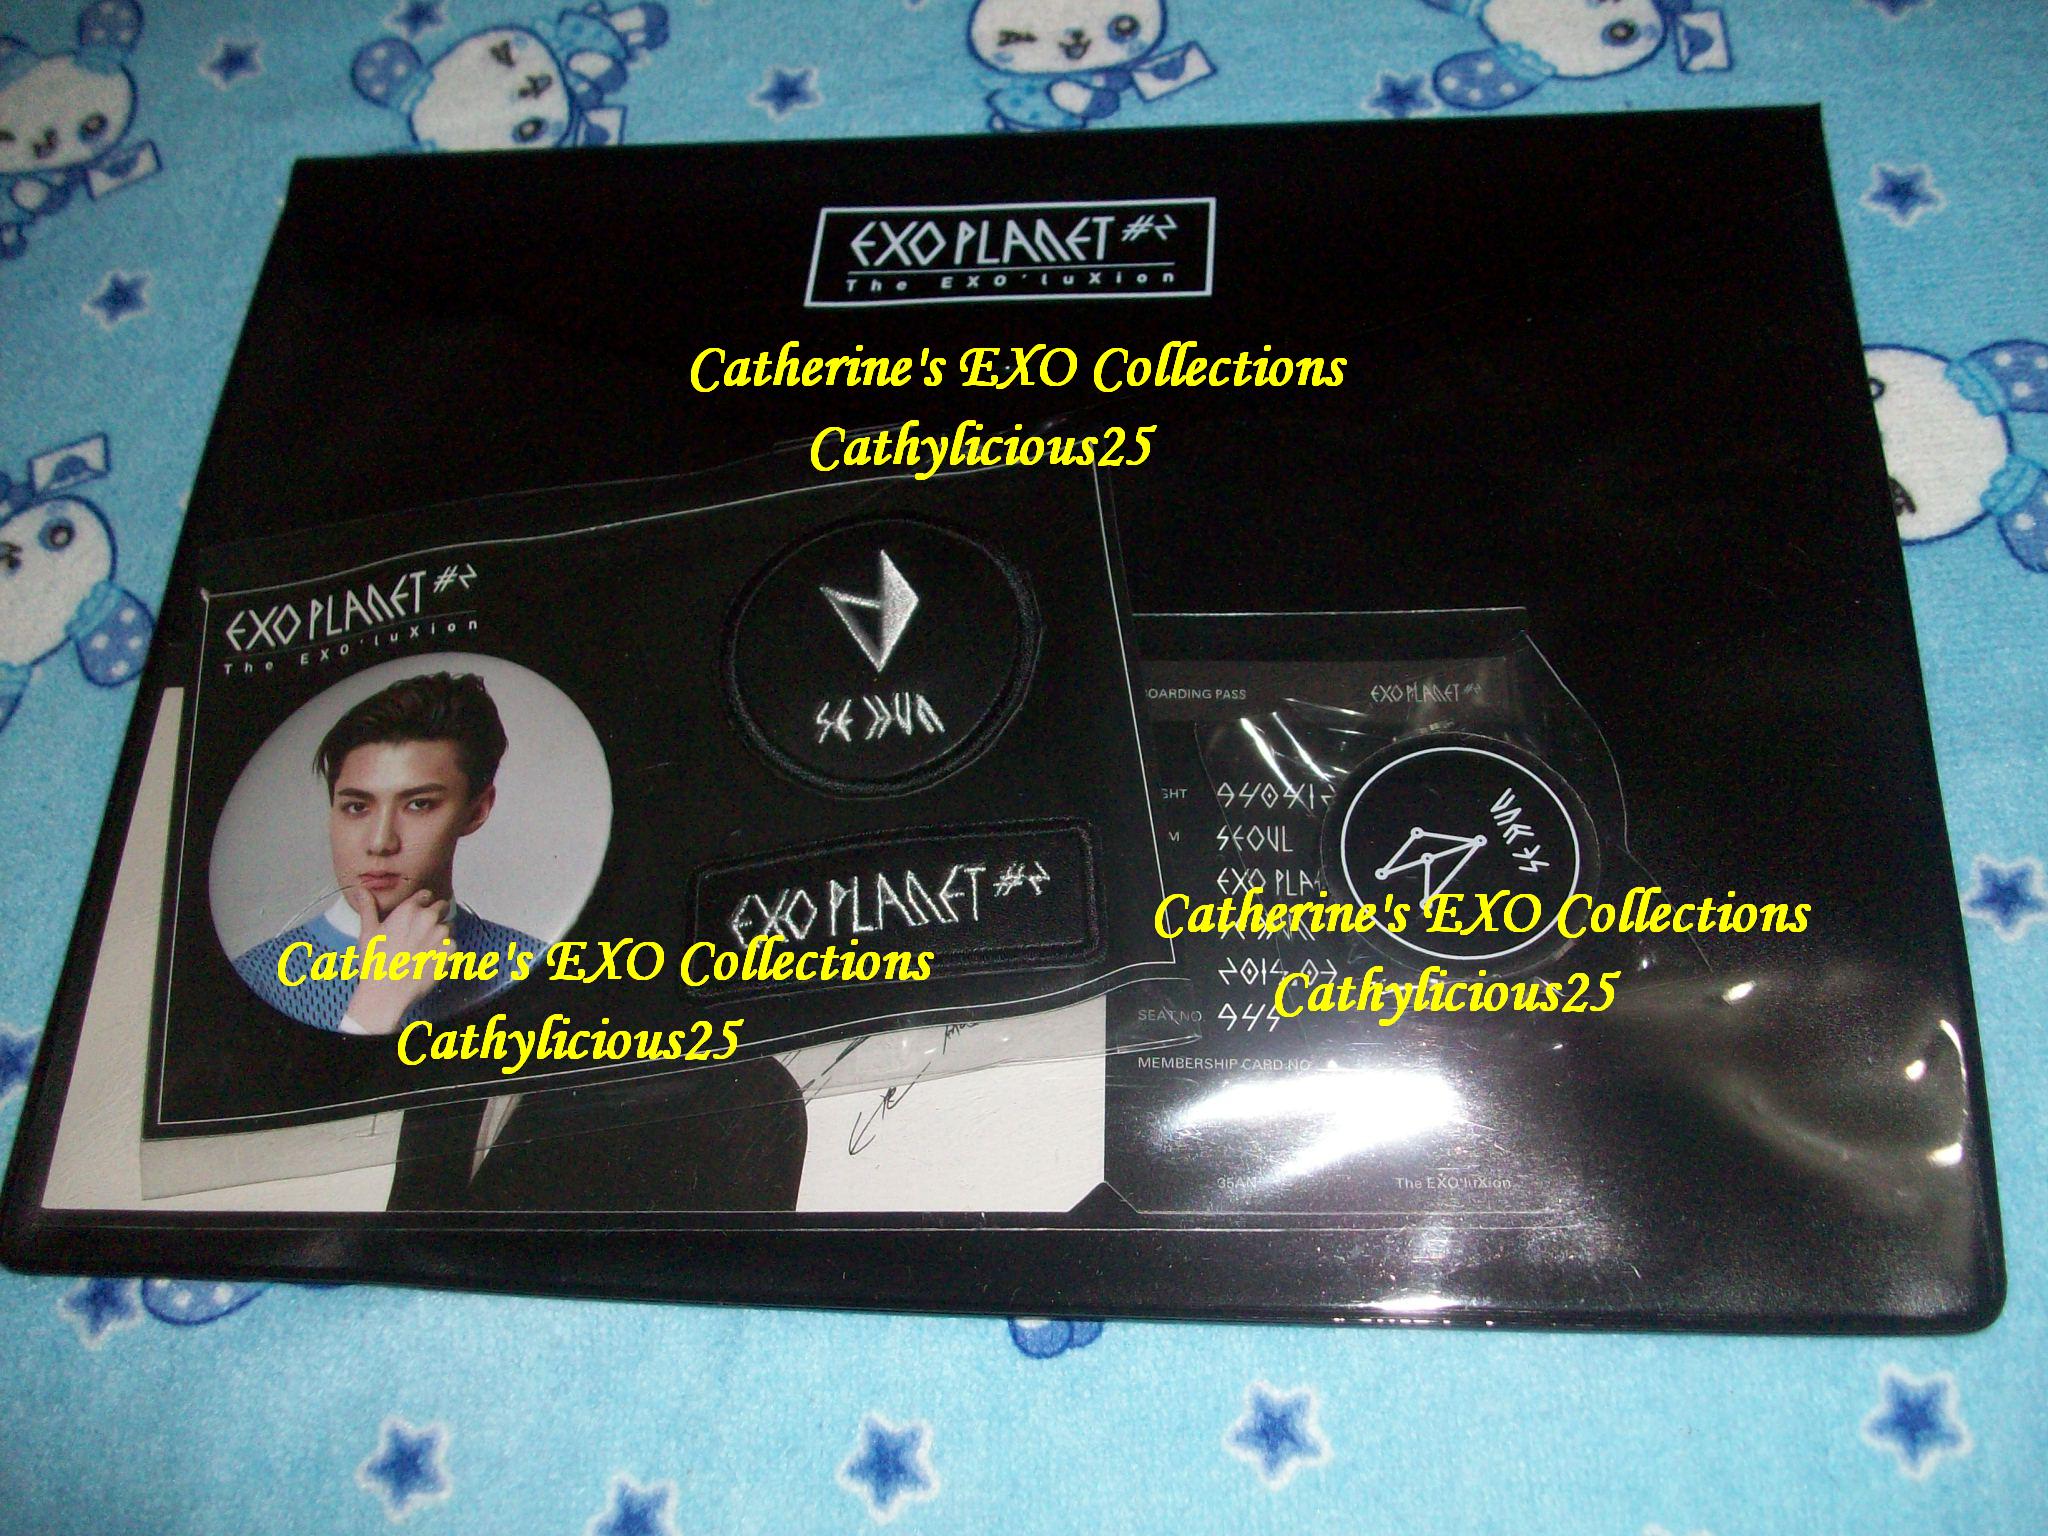 My EXO Planet #2 The EXO'luXion Concert Goods Tao and Sehun's 